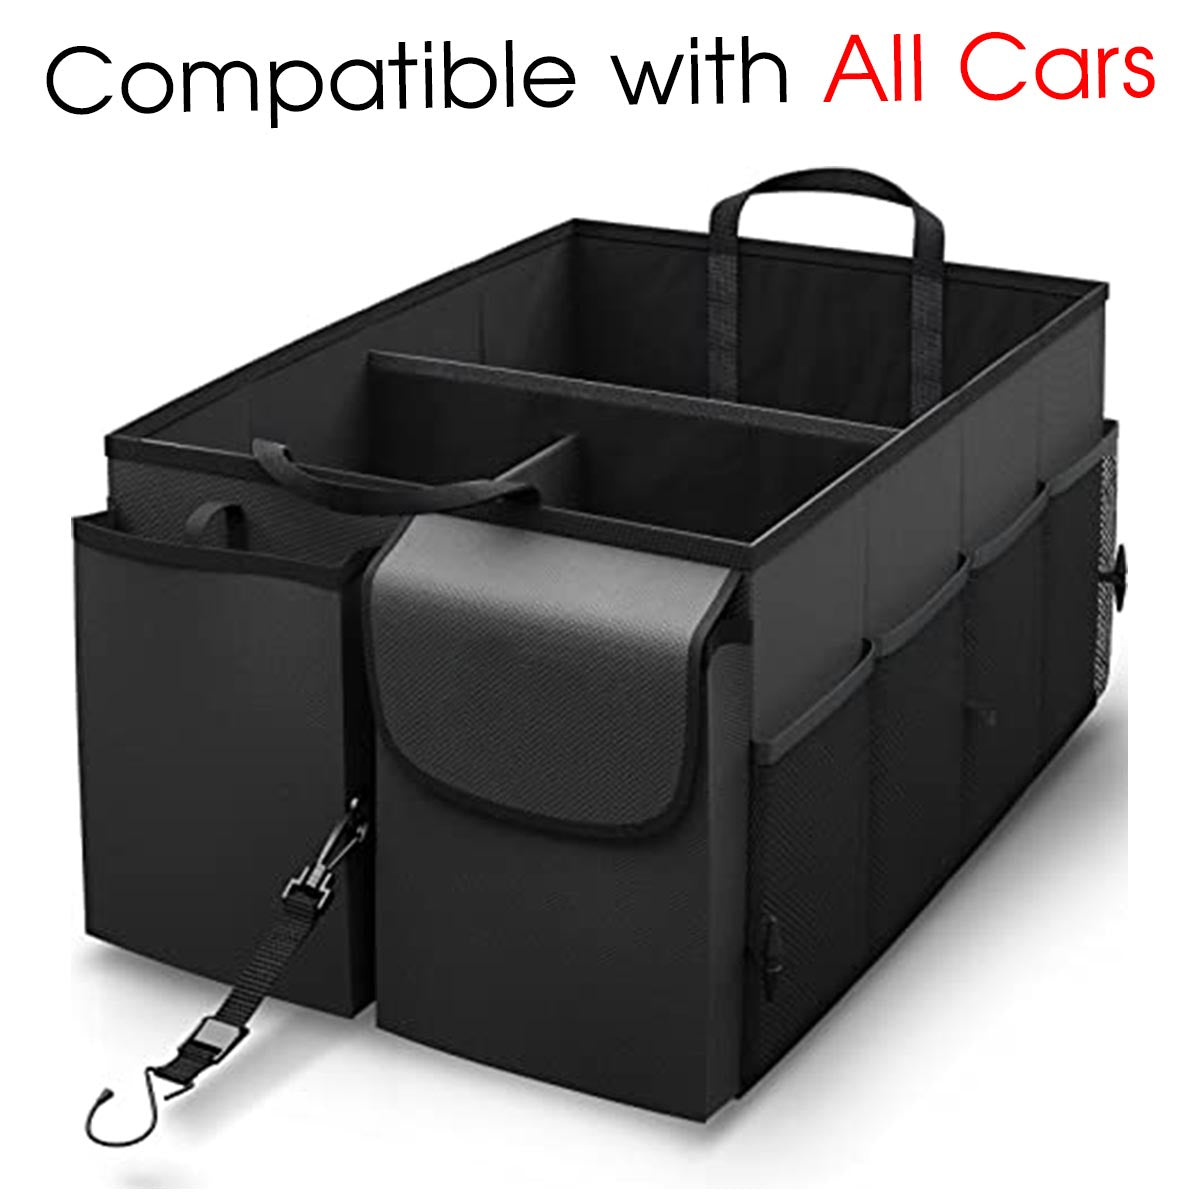 Car Trunk Organizer - Collapsible, Custom fit for All Cars, Multi-Compartment Automotive SUV Car Organizer for Storage w/ Adjustable Straps - Car Accessories for Women and Men MA12993